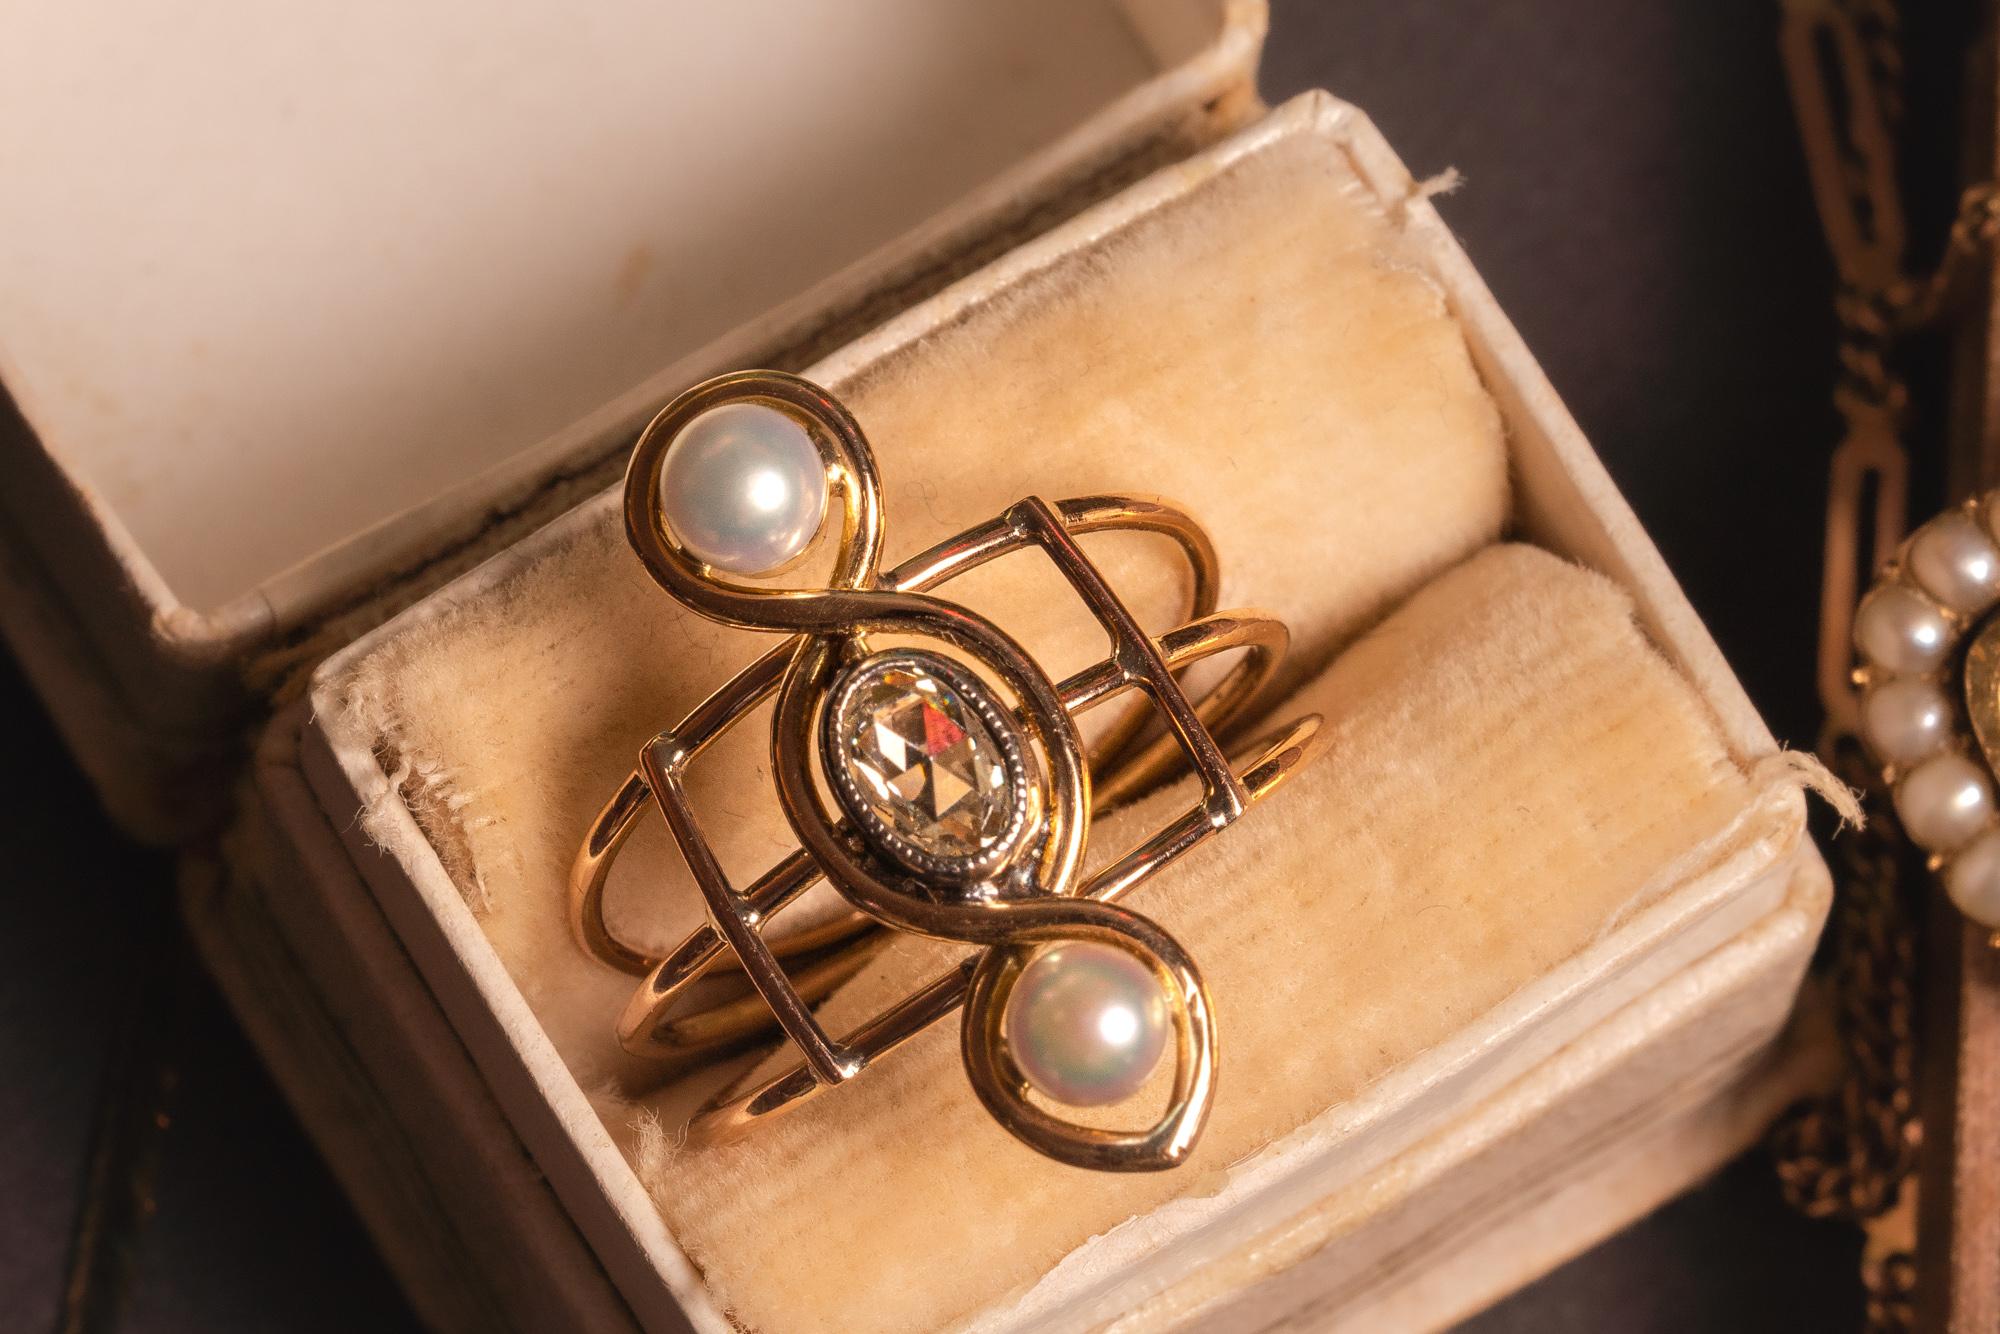 A very unusual Victorian revival three-stones ring, featuring two snow-white pearls and a chunky oval rose cut diamond of circa 0.8 ct.

The diamond measures 5.5 x 4 mm and is set in an eternity-shaped setting with two lovely pearls. The shank is